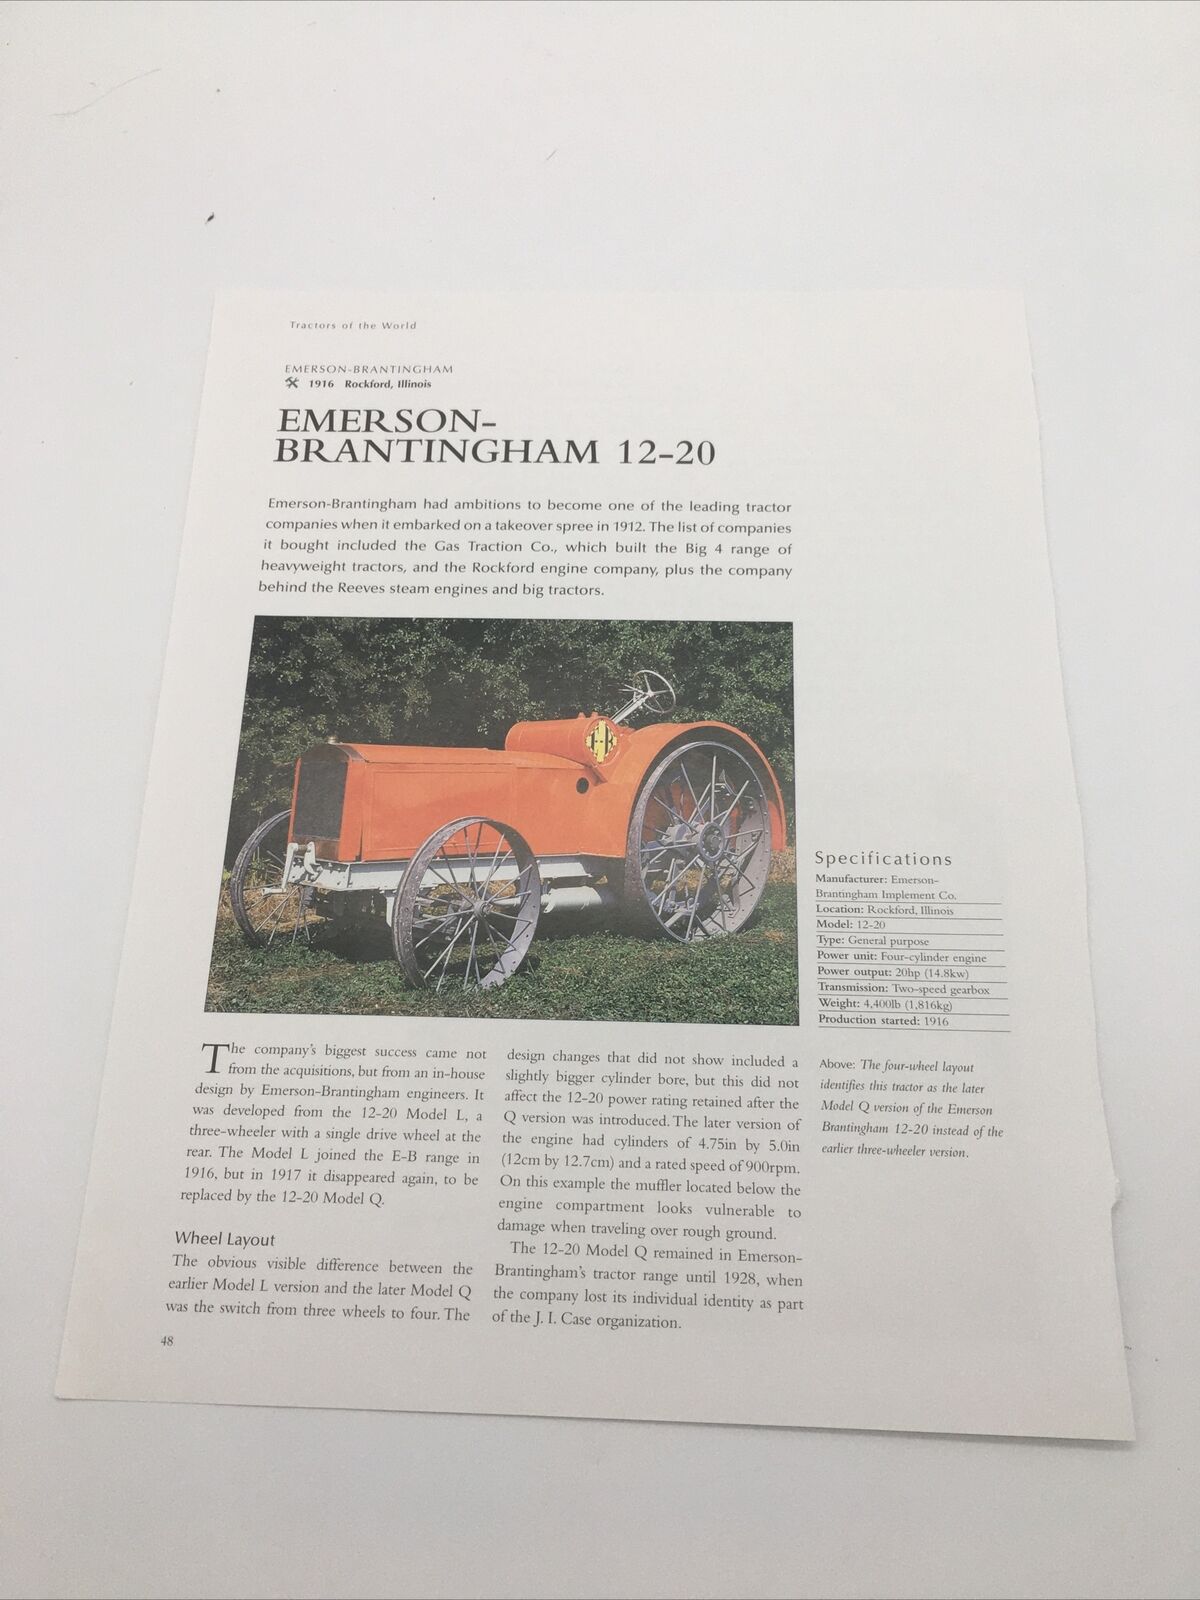 Emerson-Brantingham 12-20 Vintage Tractor Frameable Article Pics Specs Display